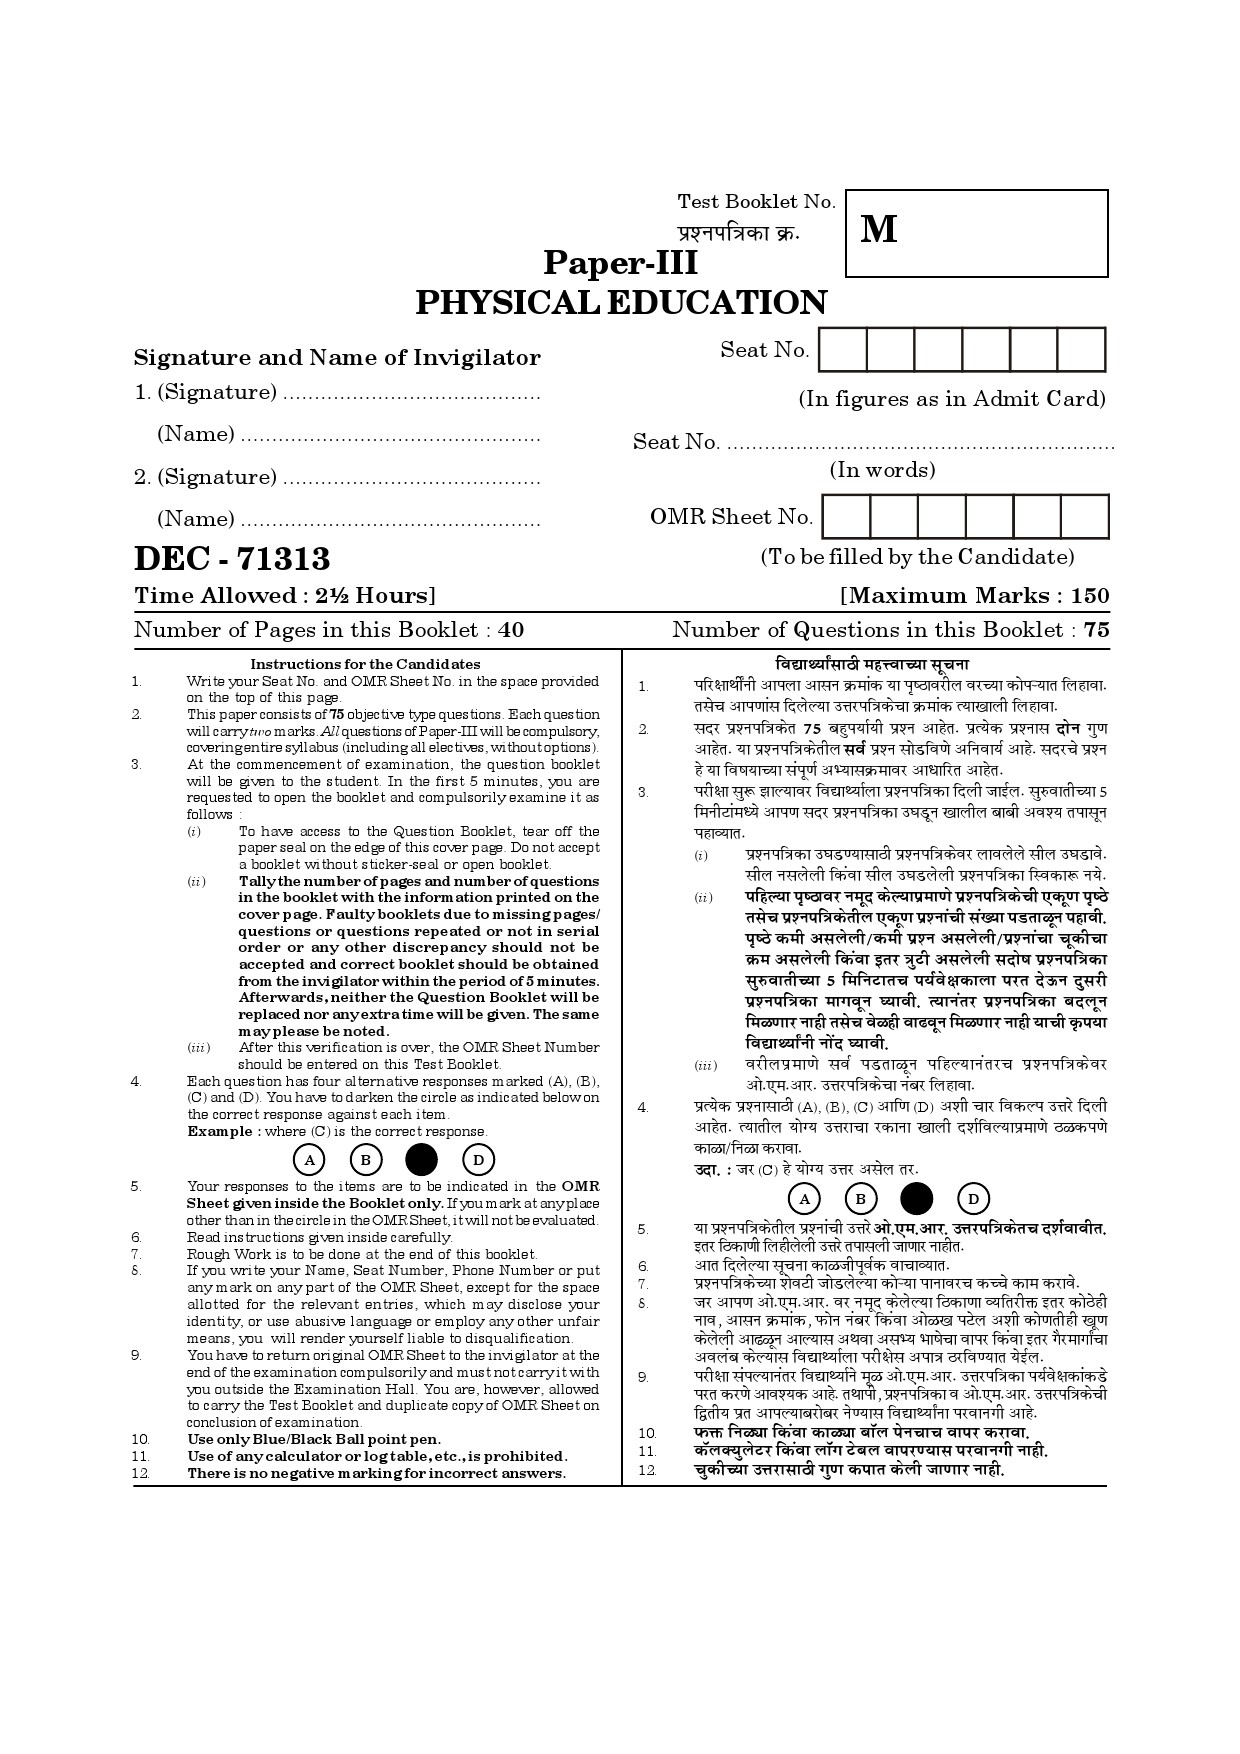 Maharashtra SET Physical Education Question Paper III December 2013 1